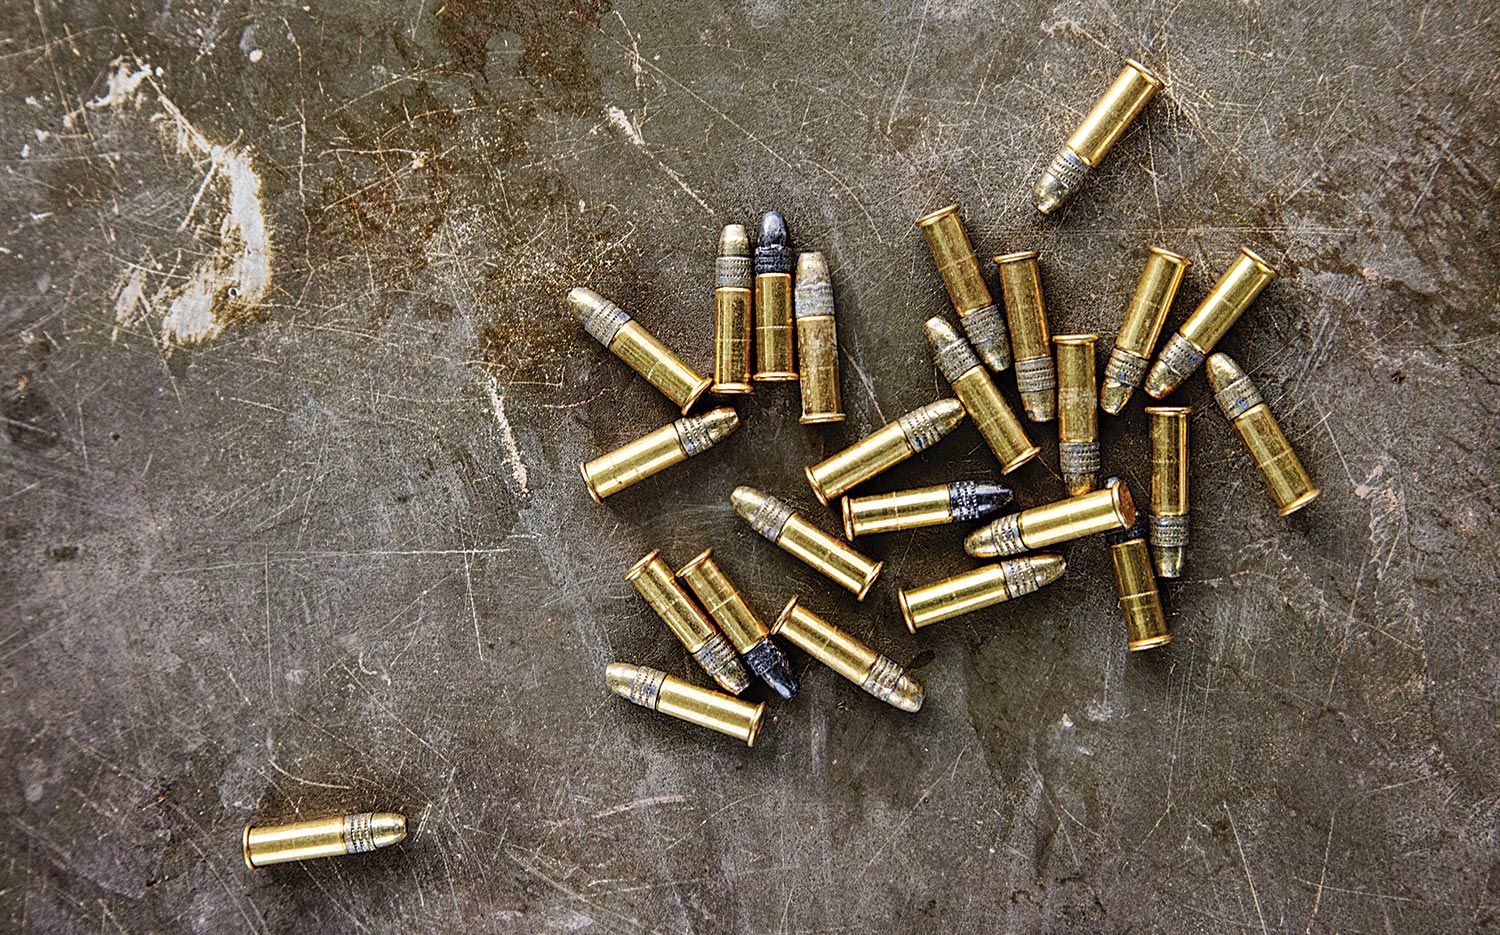 A collection of 22 LR cartridges on a stone background